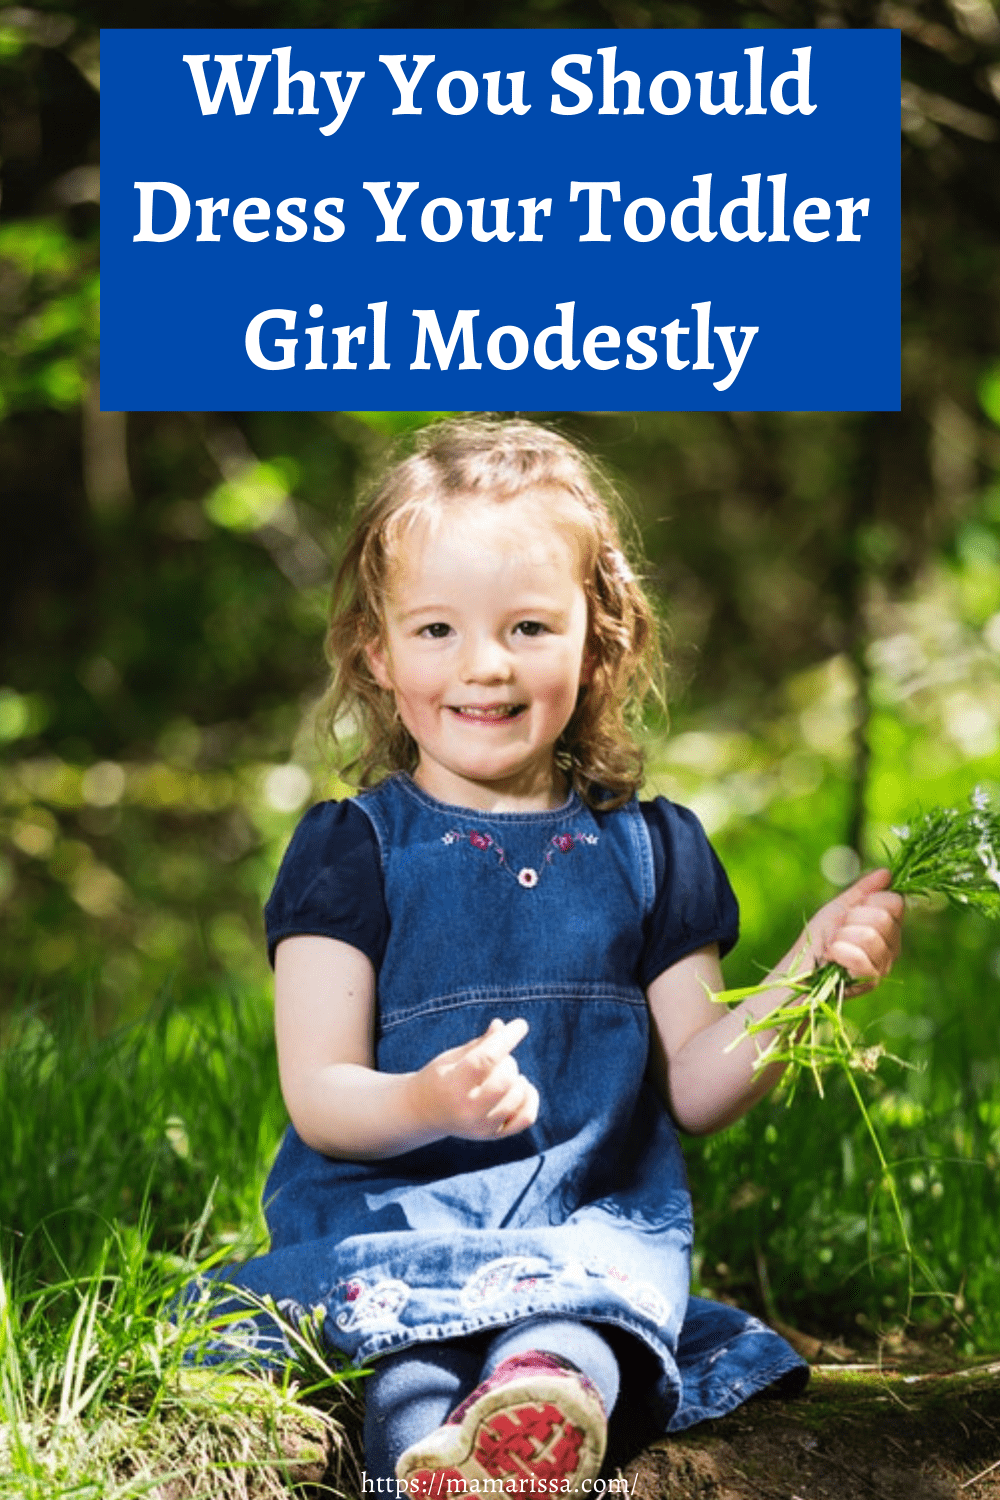 Why You Should Dress Your Toddler Girl Modestly